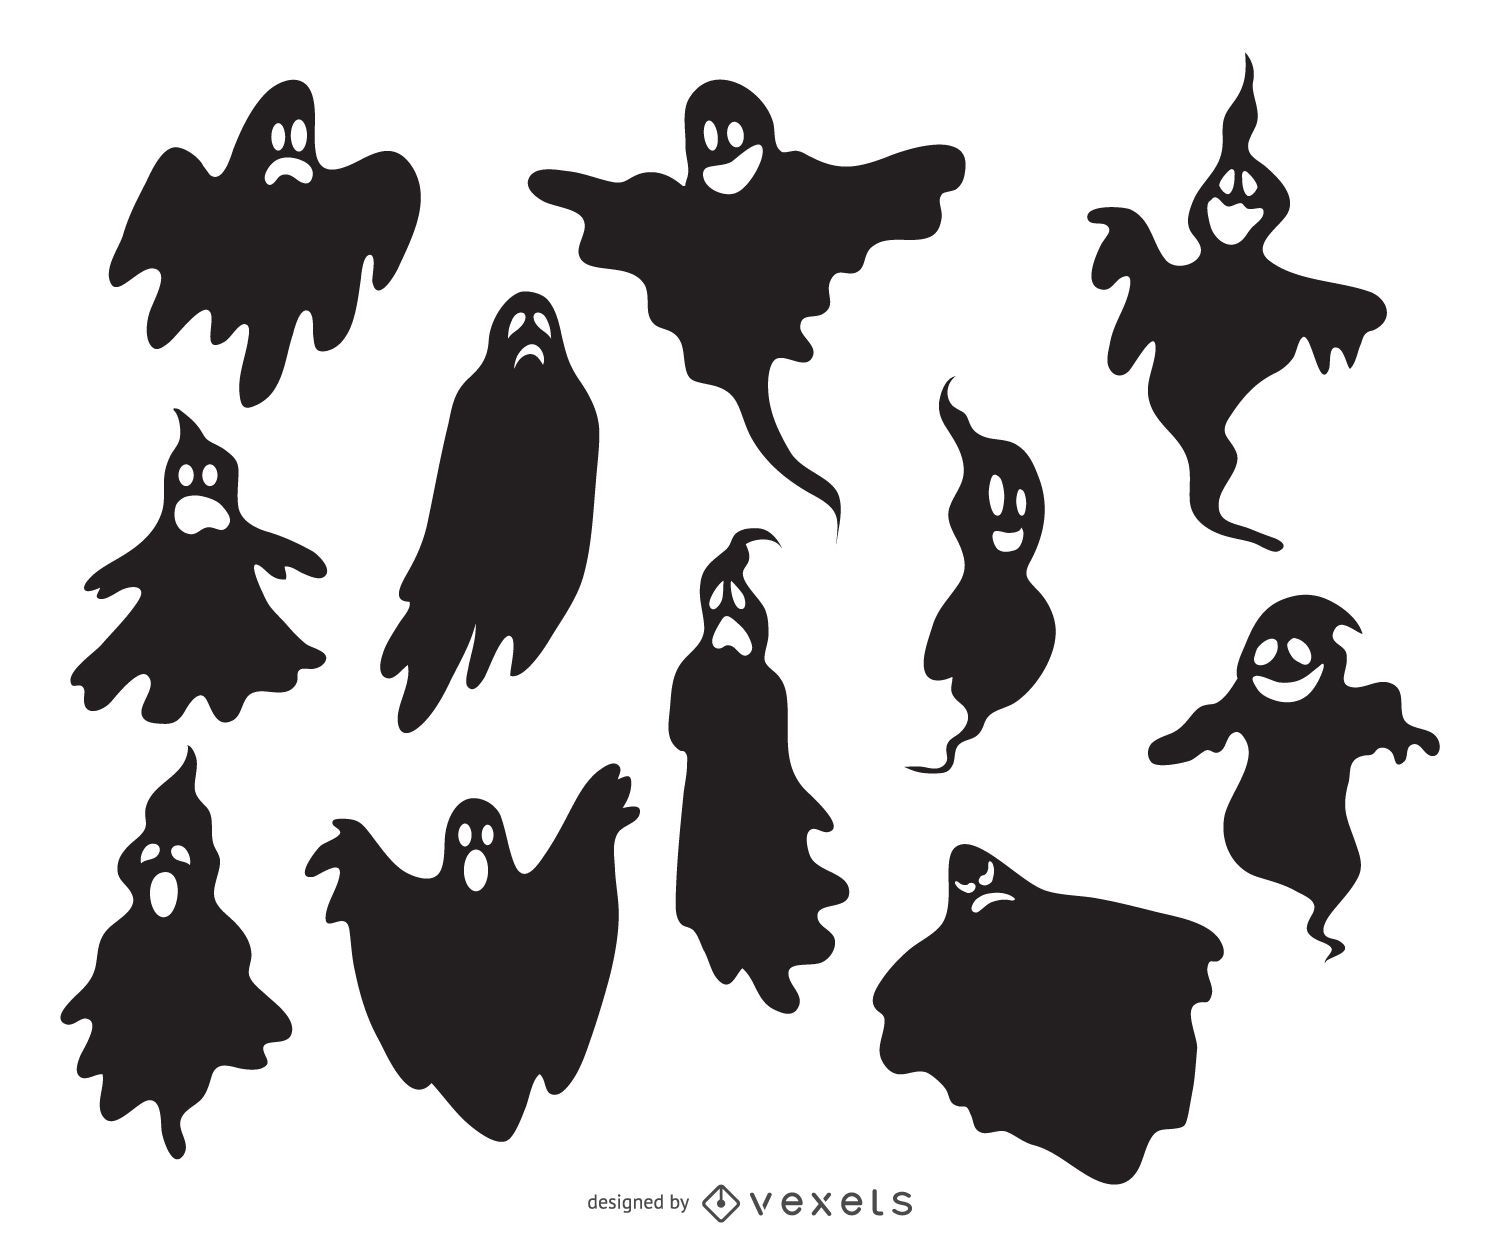 Creepy illustrated ghost silhouettes